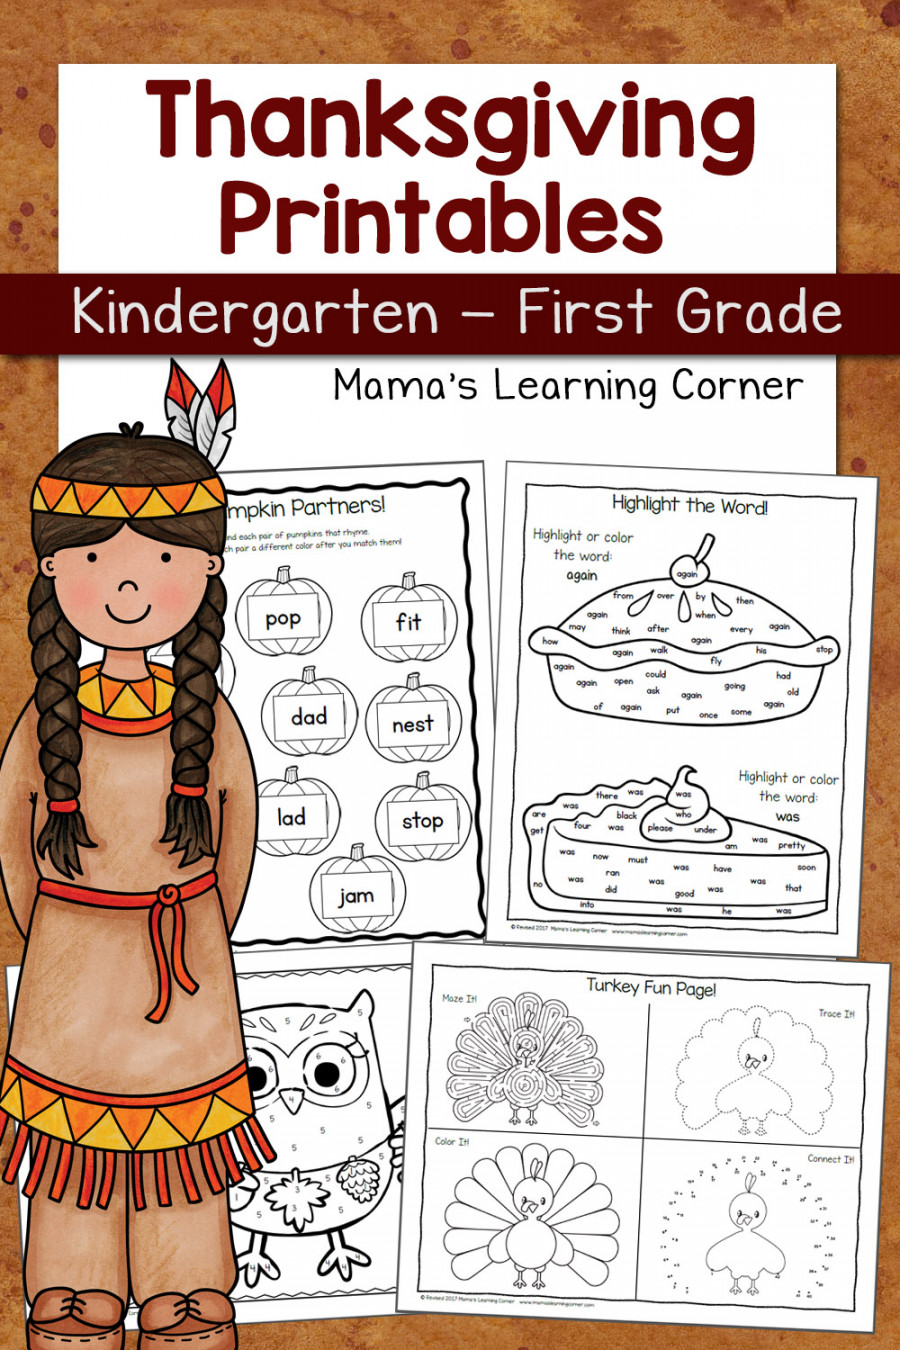 Thanksgiving Worksheets for Kindergarten and First Grade - Mamas